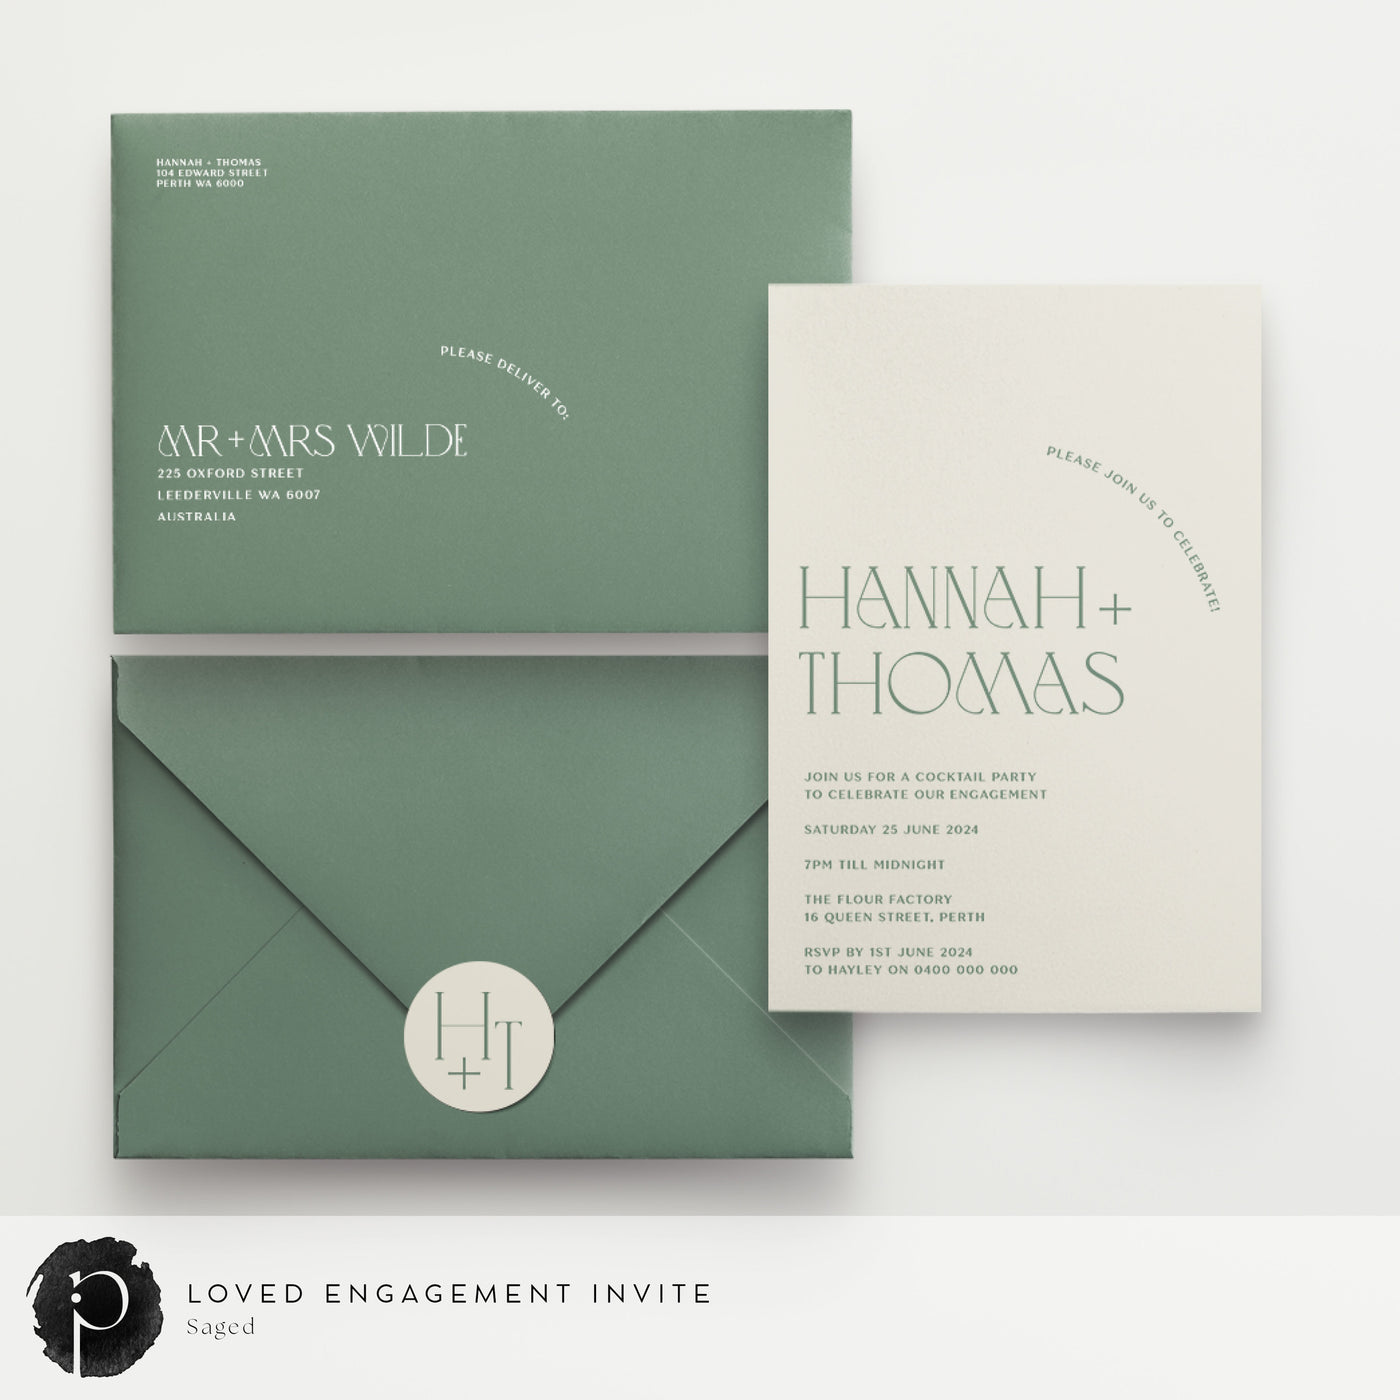 Loved - Engagement Invitations